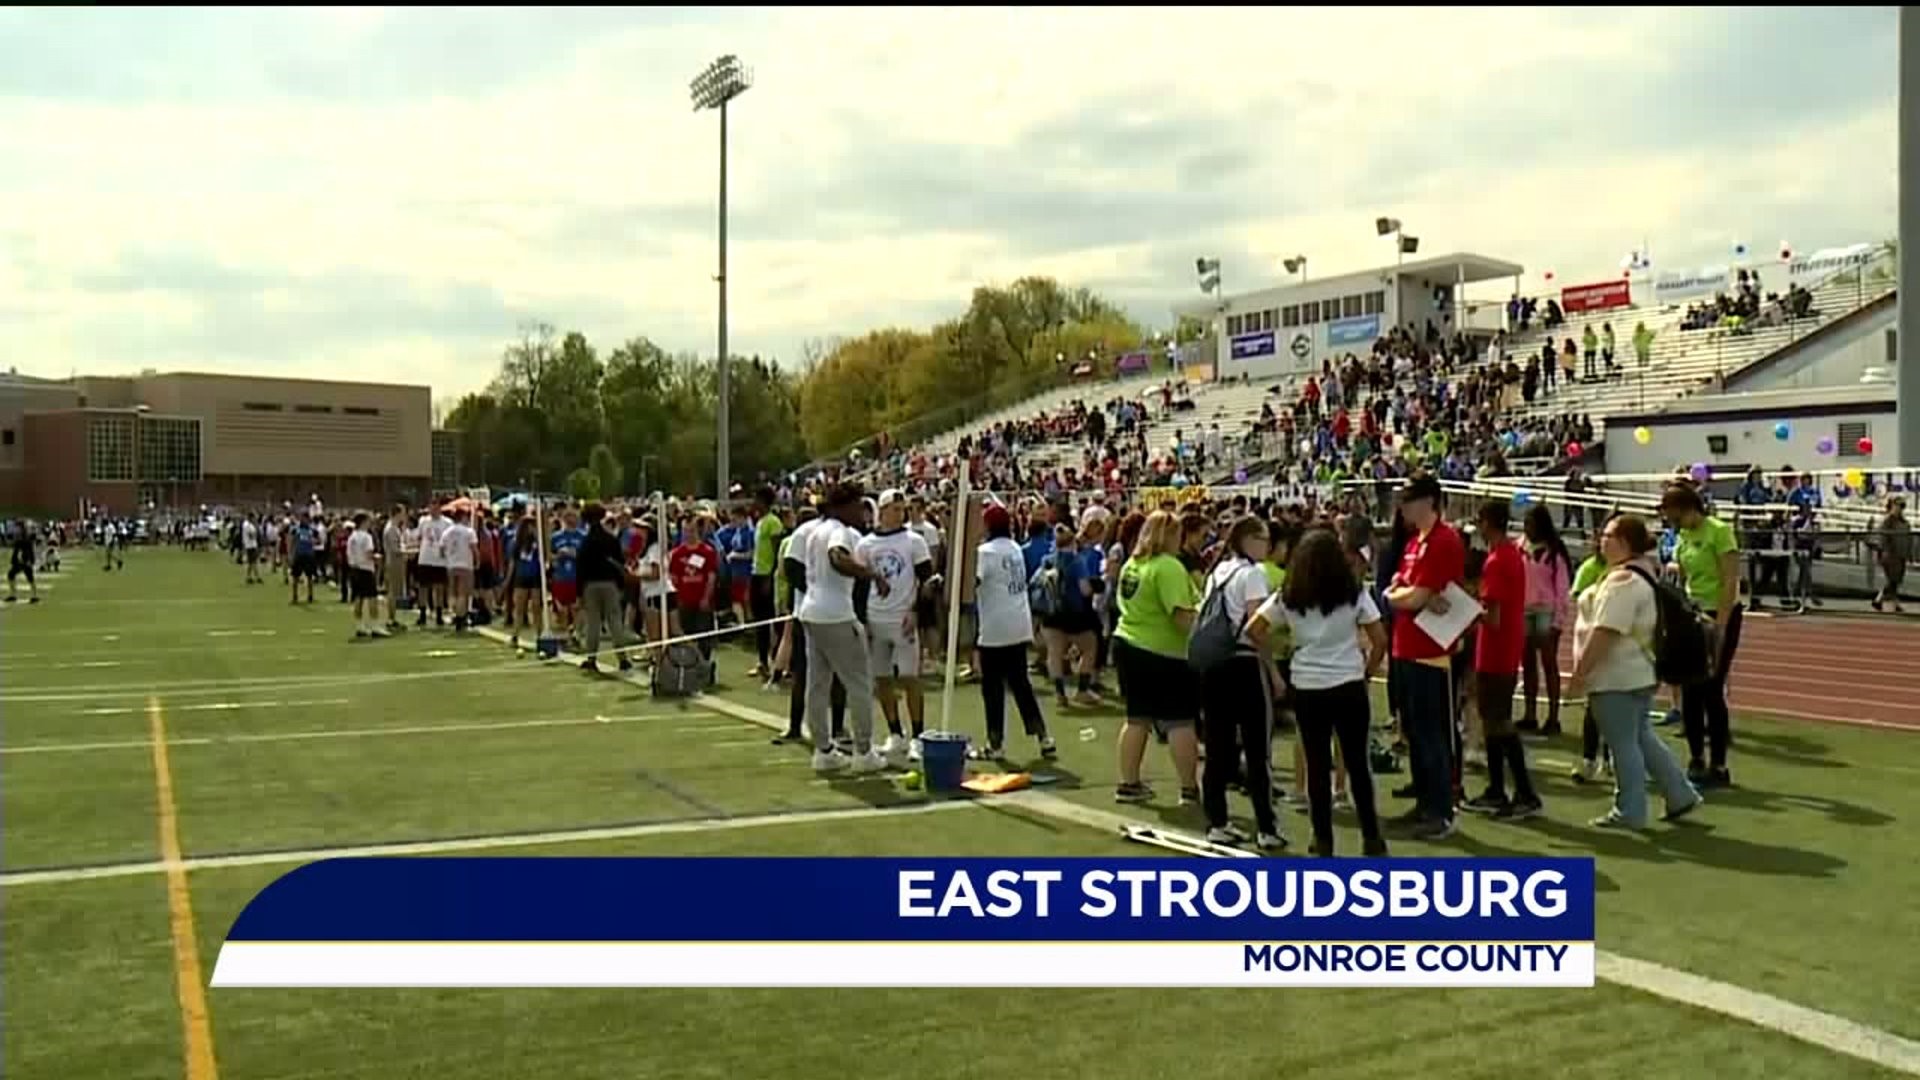 Track and Field Special Olympics Held in Monroe County